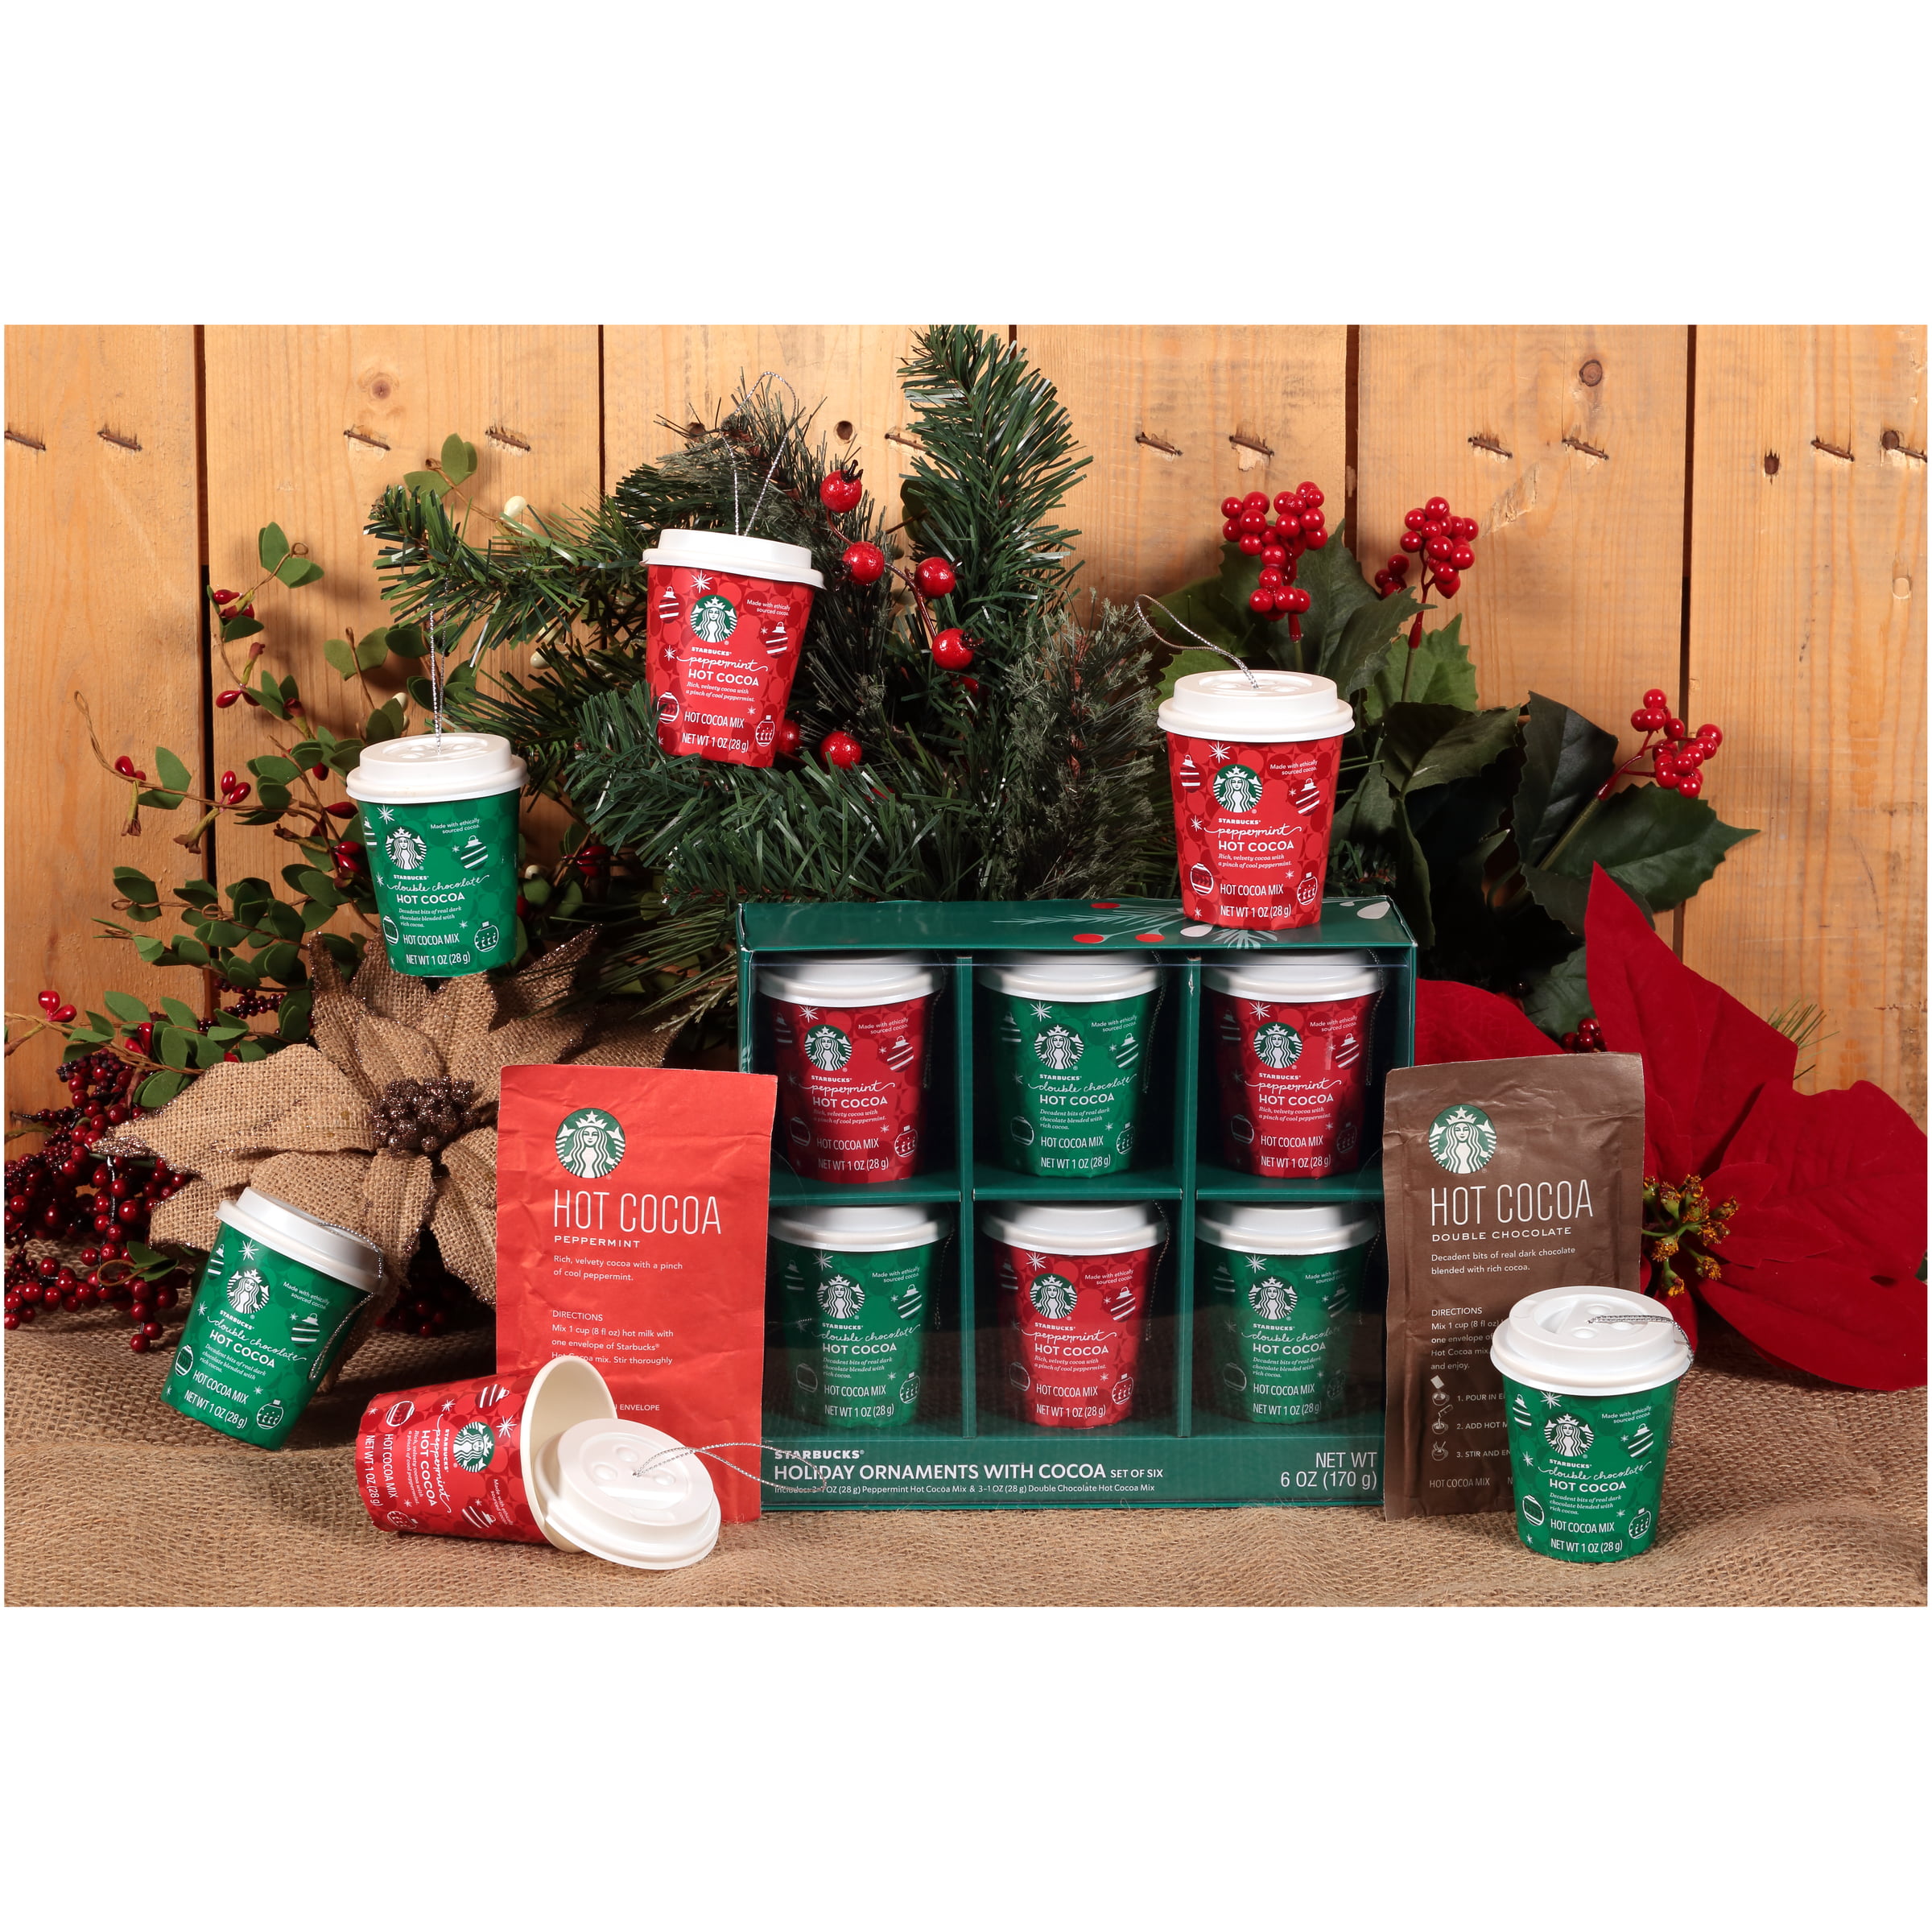 STARBUCKS 6-pack Mini Cup Holiday Ornaments Gift Set With Hot